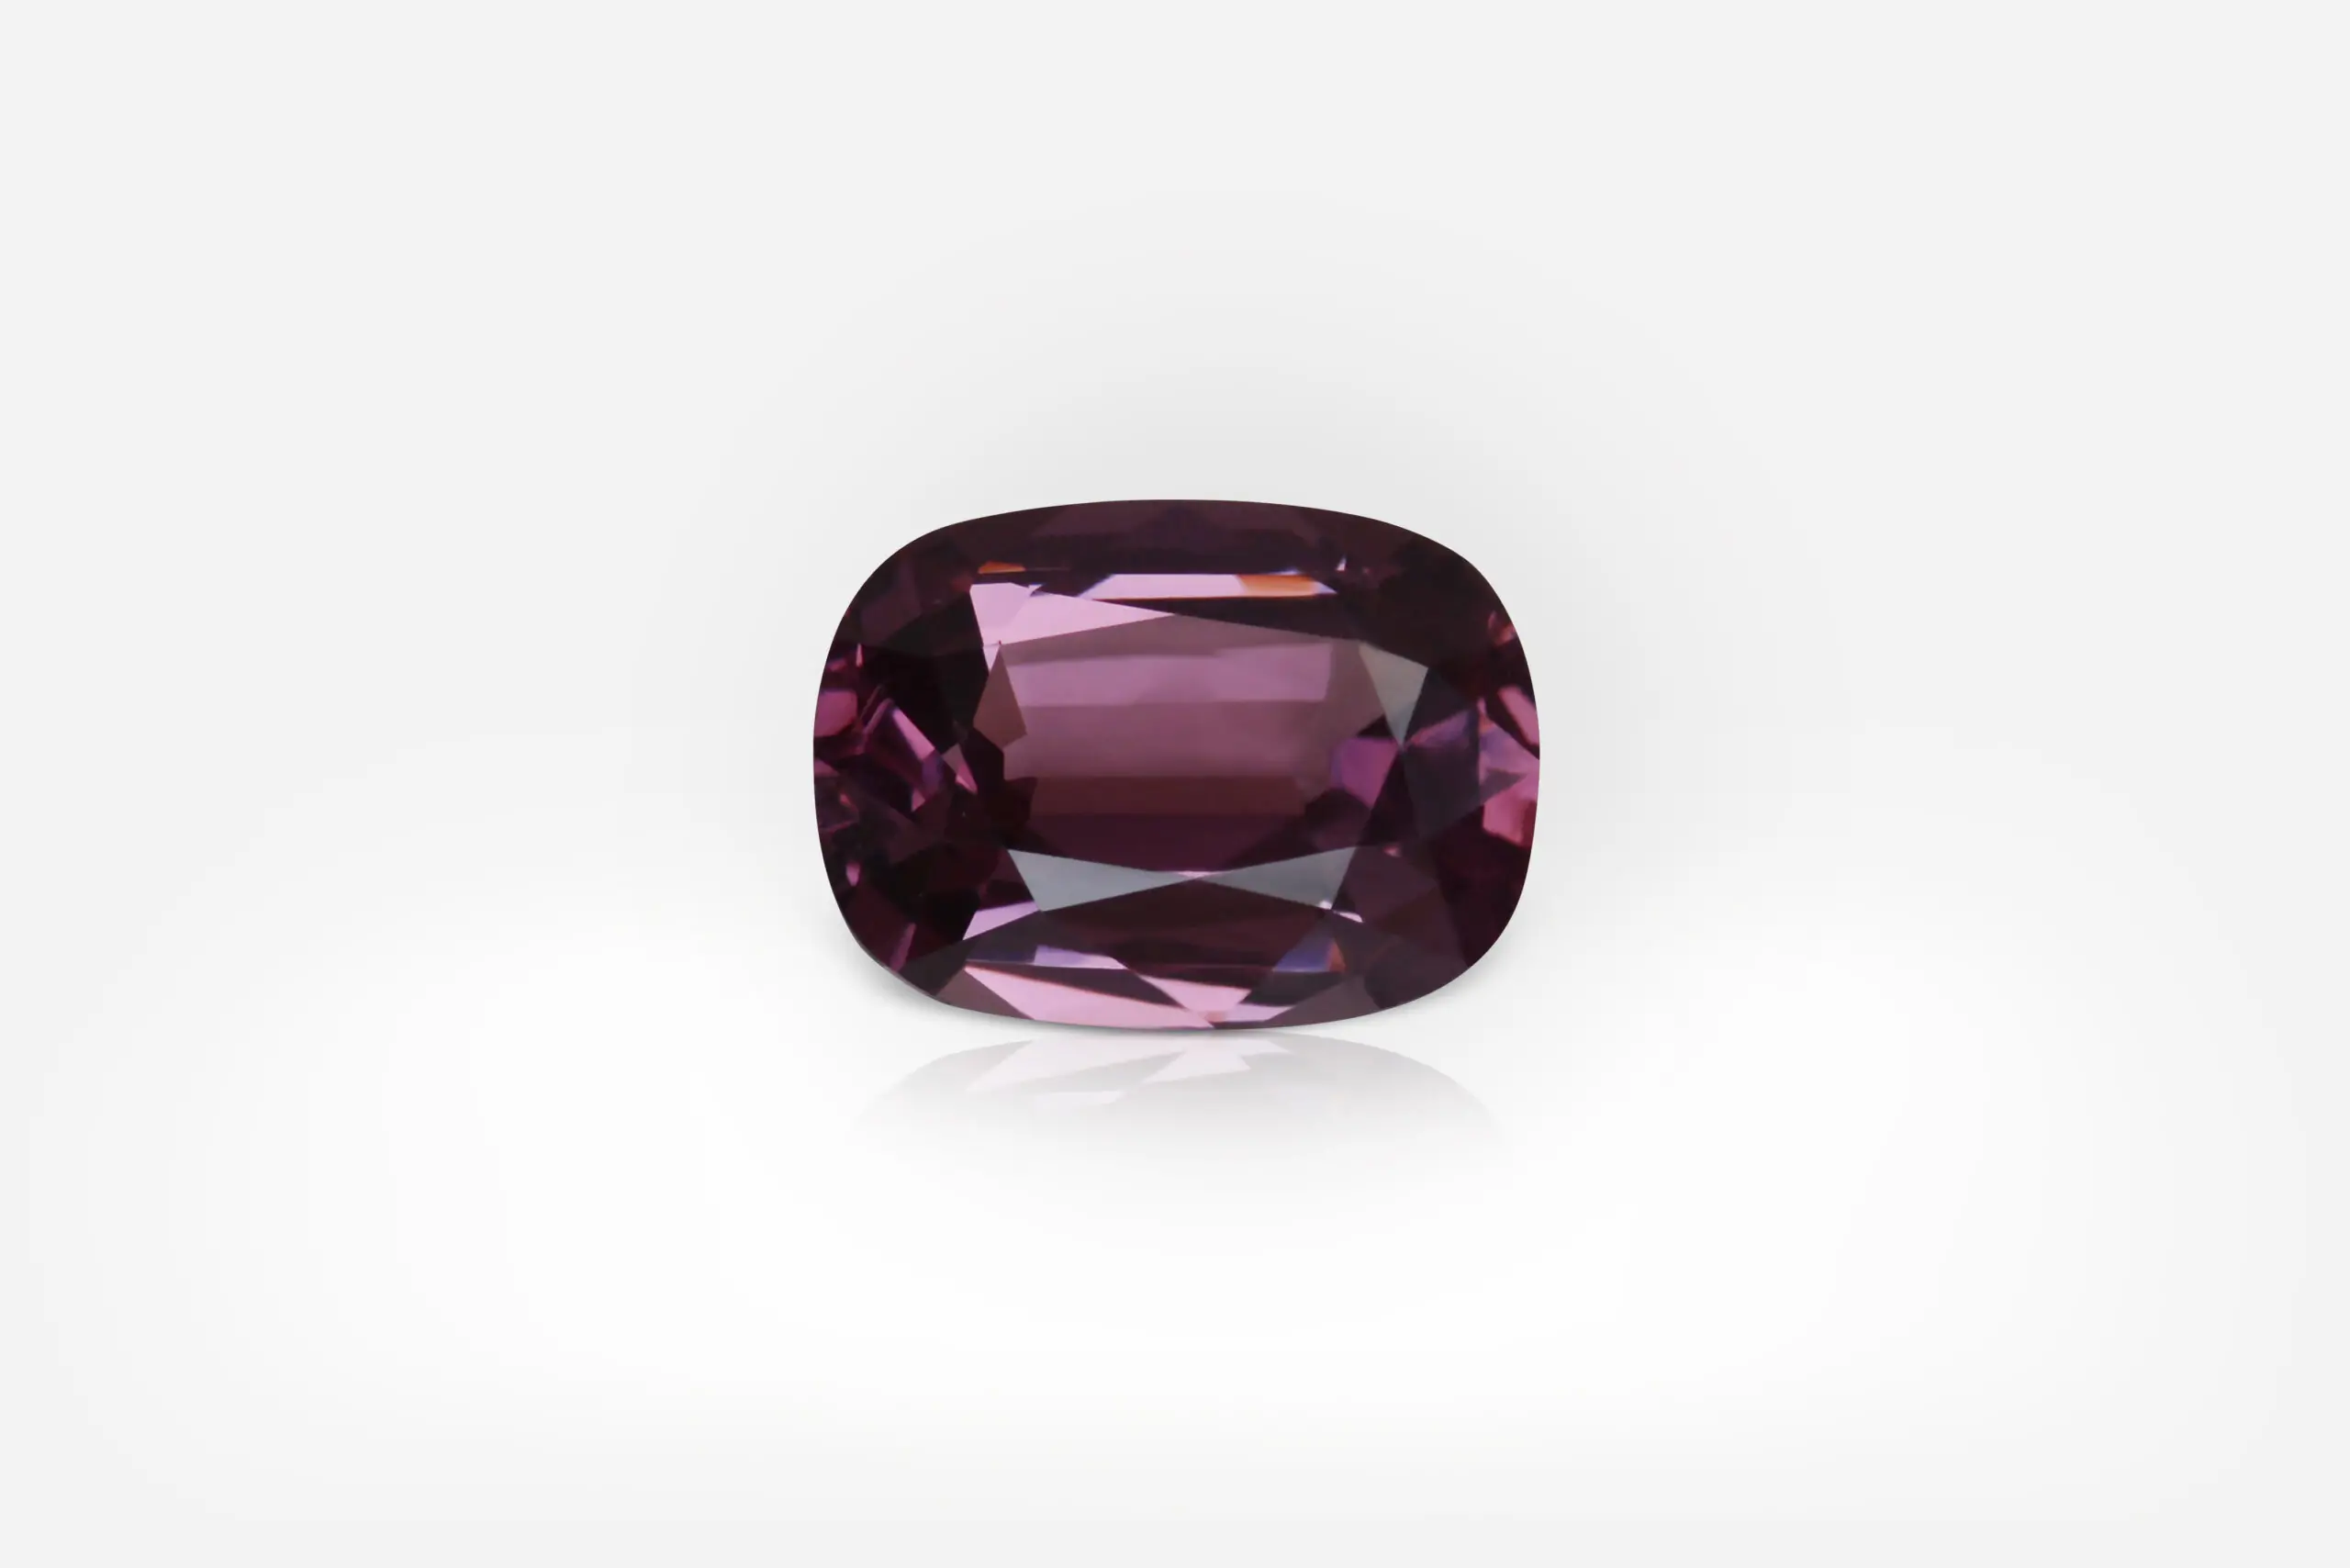 2.53 carat Cushion Shape Spinel - picture 1